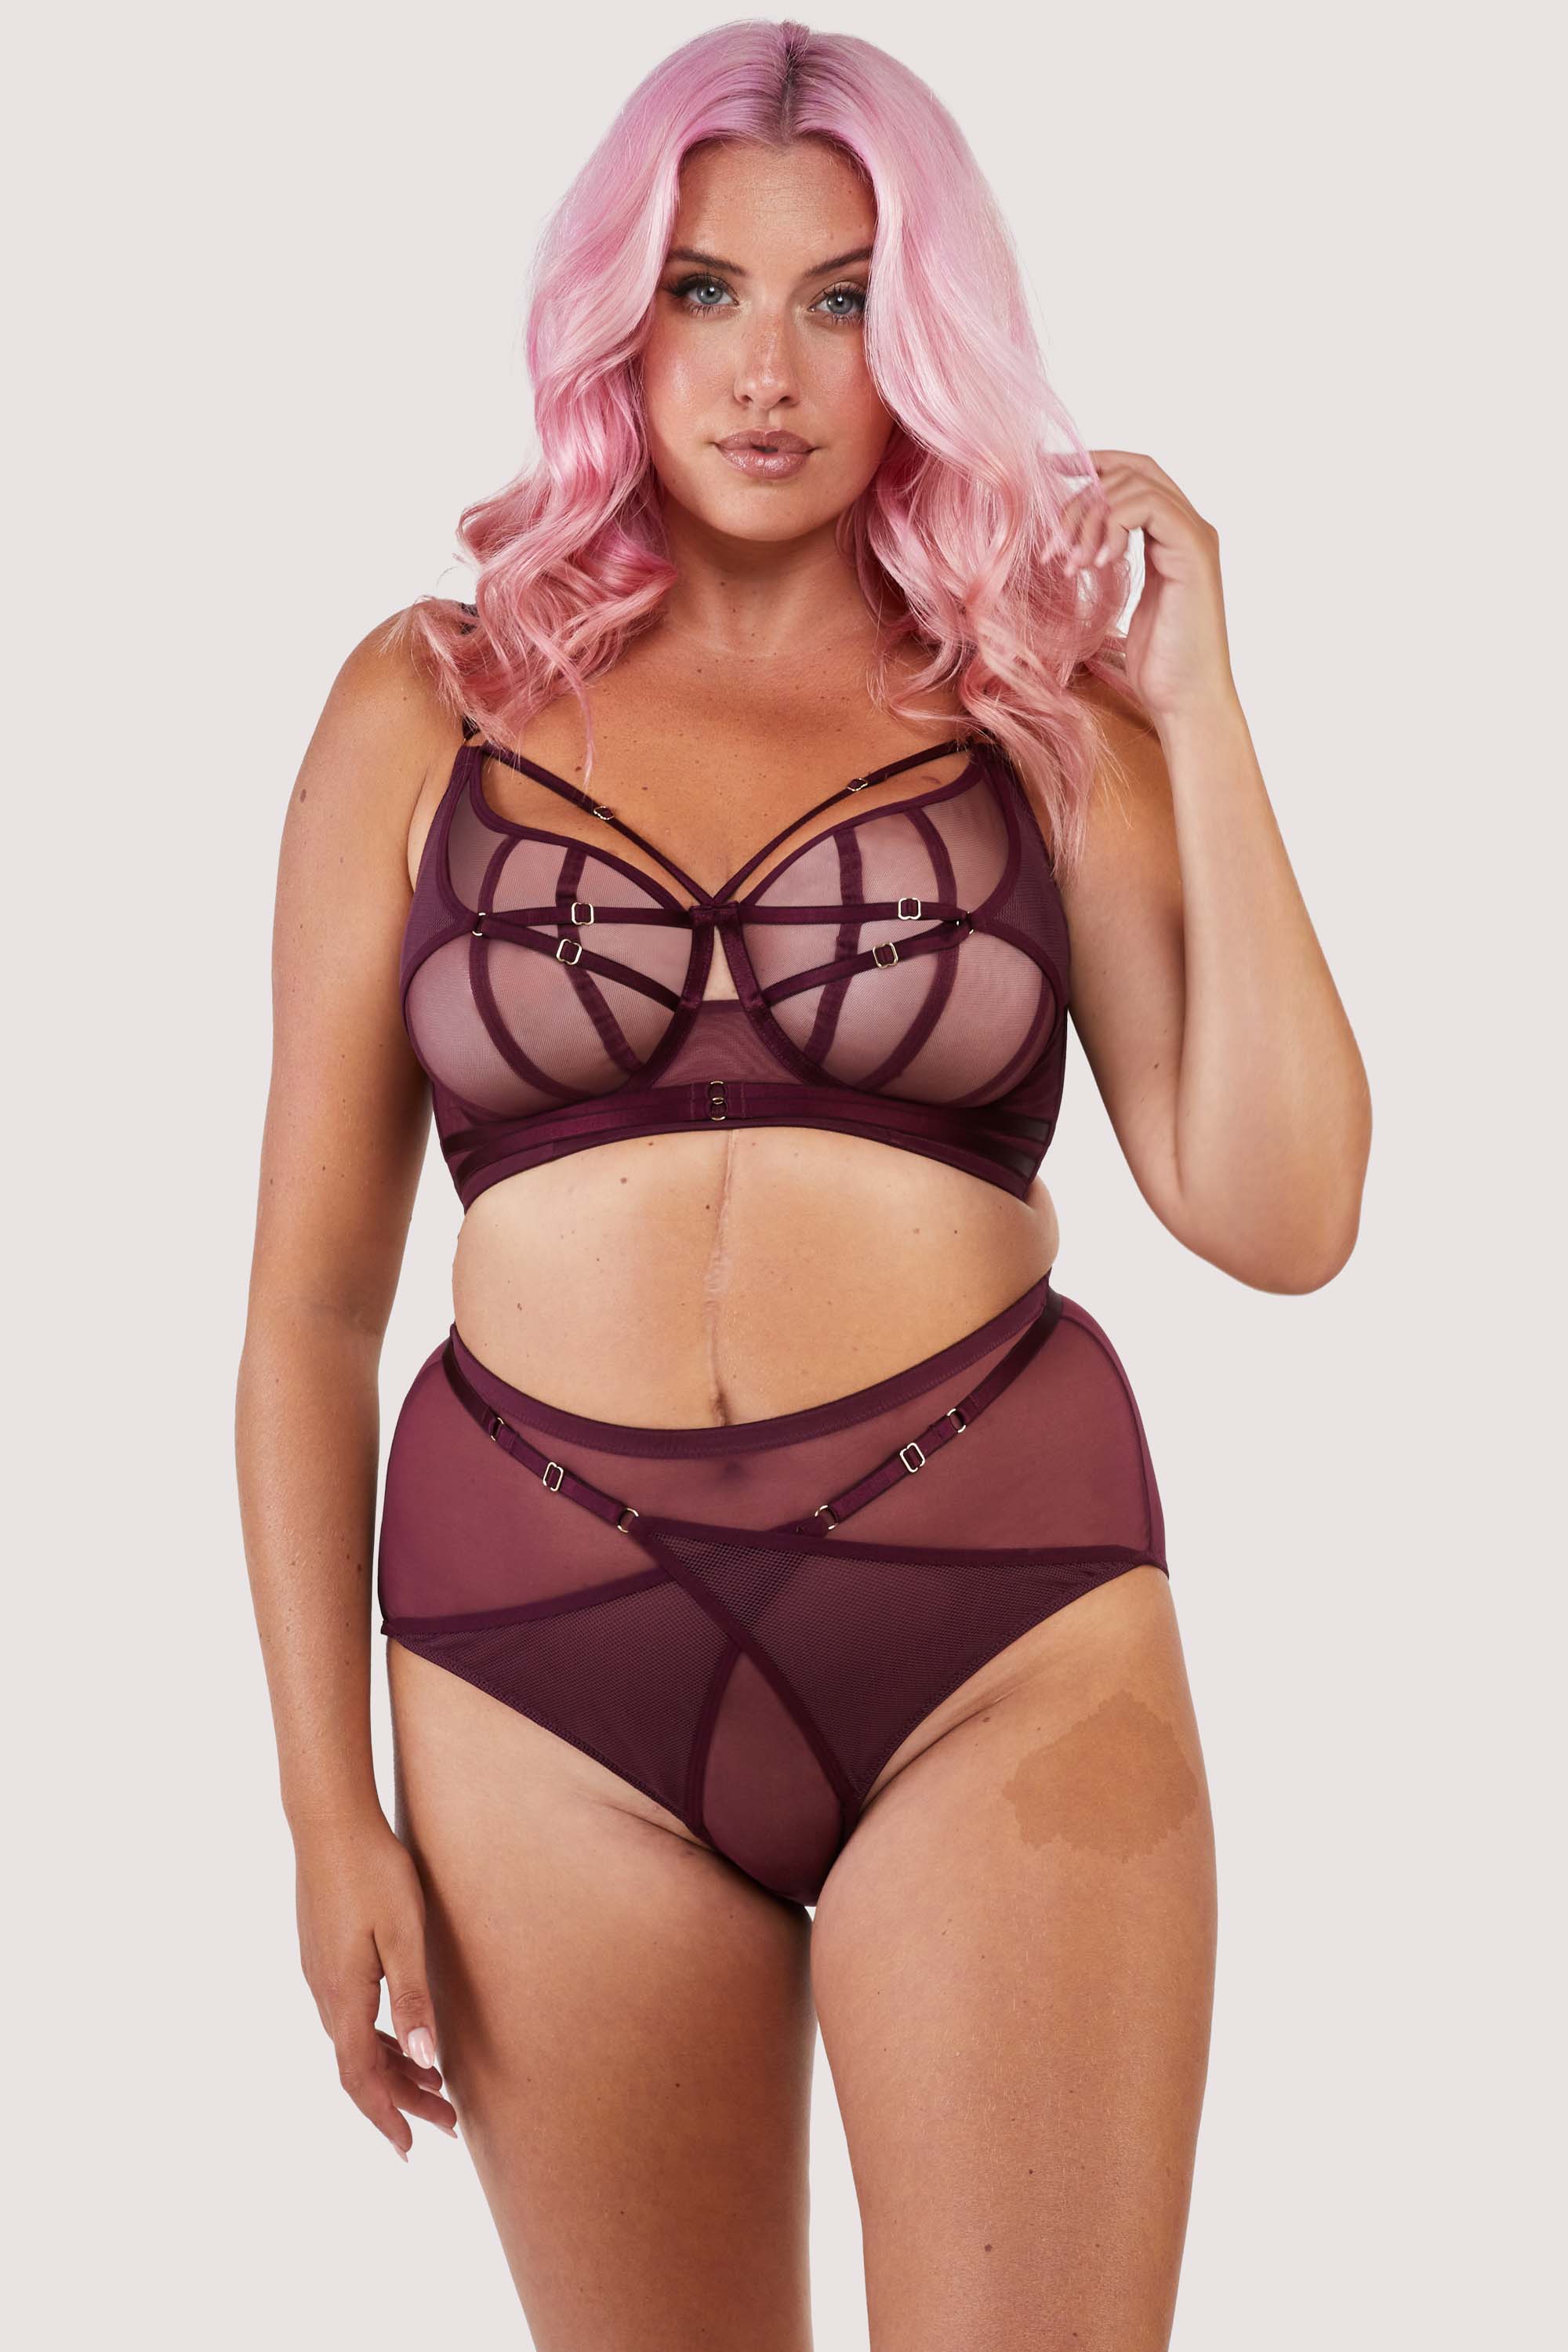 Harness style brief with mesh overlay and visible gold hardware in a deep wine red/purple, worn with a matching bra.